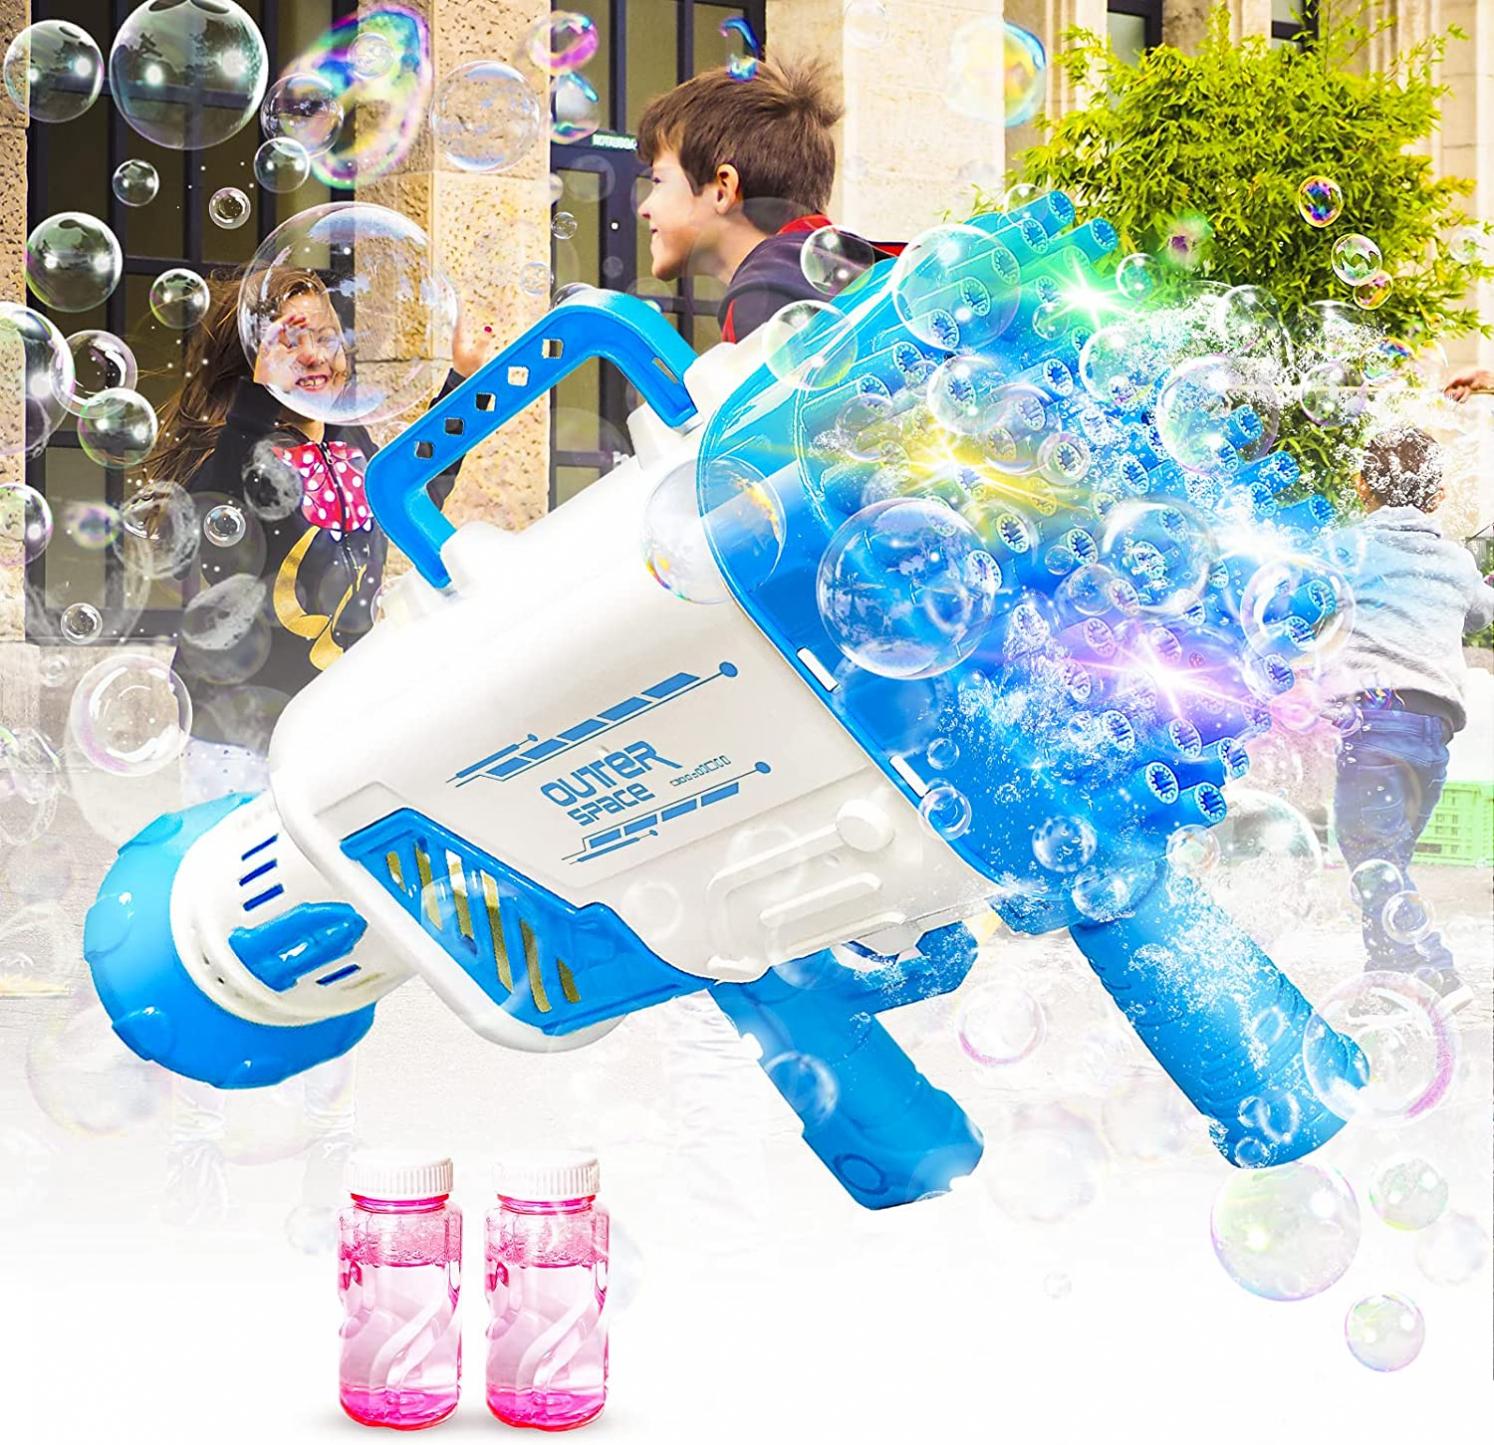 Craft Spot! 64-Hole Bubble Gun Rocket for Kids, 2022 New Electric Automatic Bubble Gun with Colorful Lights for Wedding Summer Party Outdoor, Best Gift for Adults Boys Girls